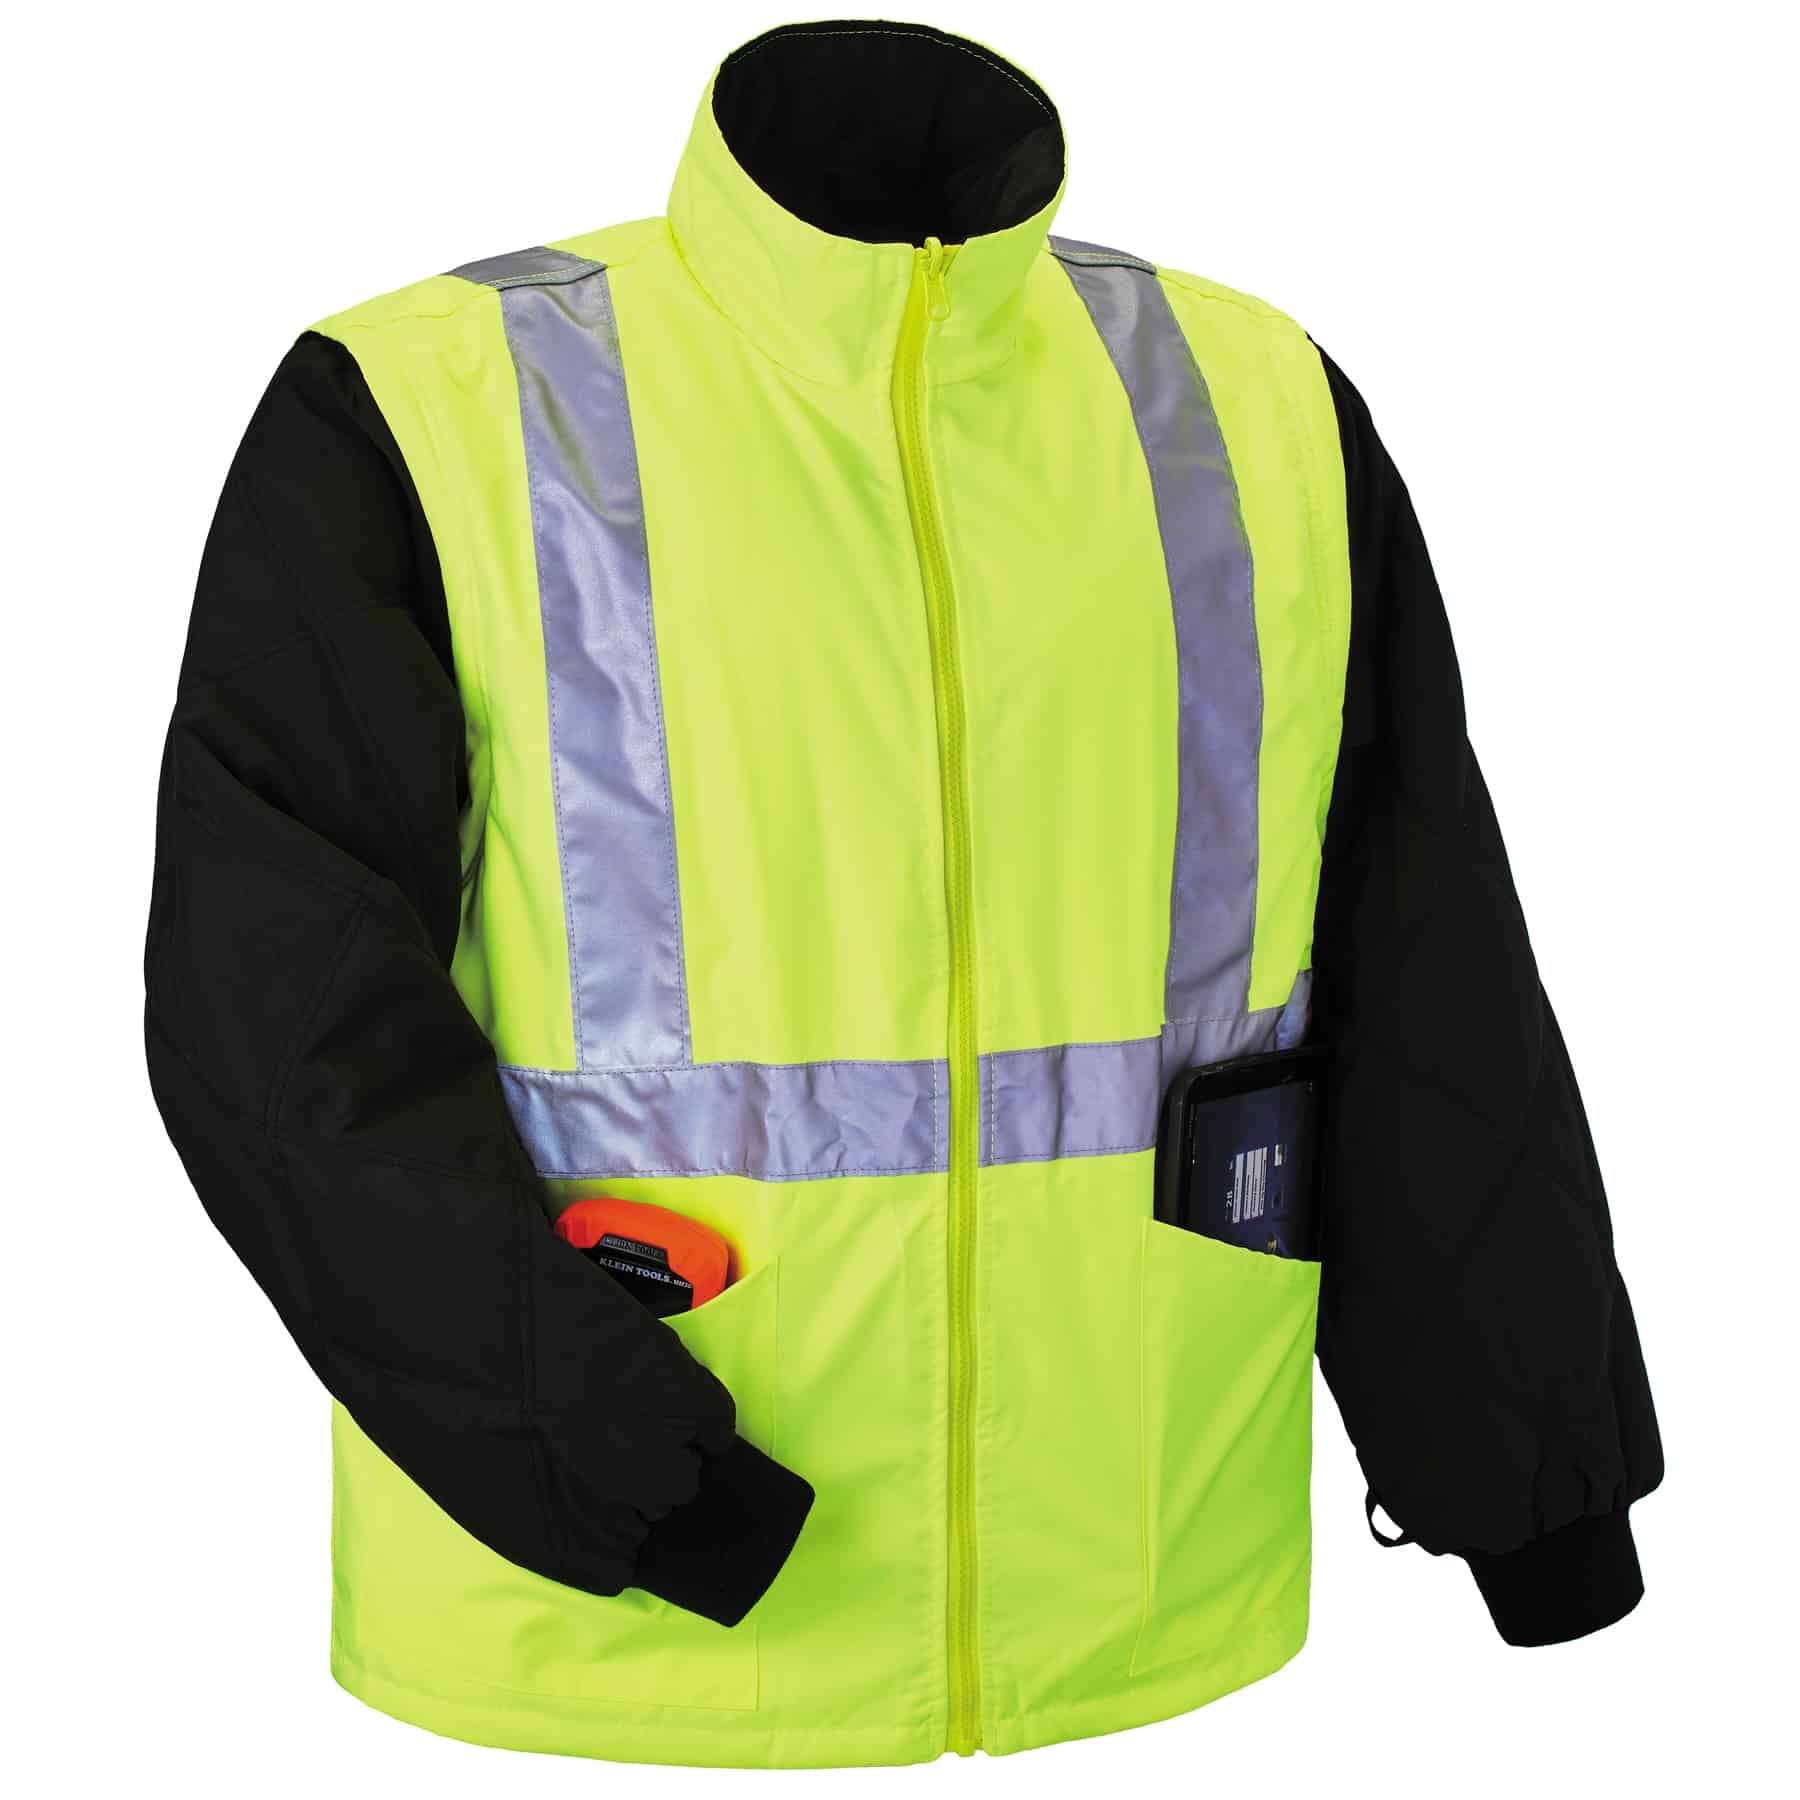 GloWear 8385 4-in-1 High Visibility Jacket - Type R, Class 3